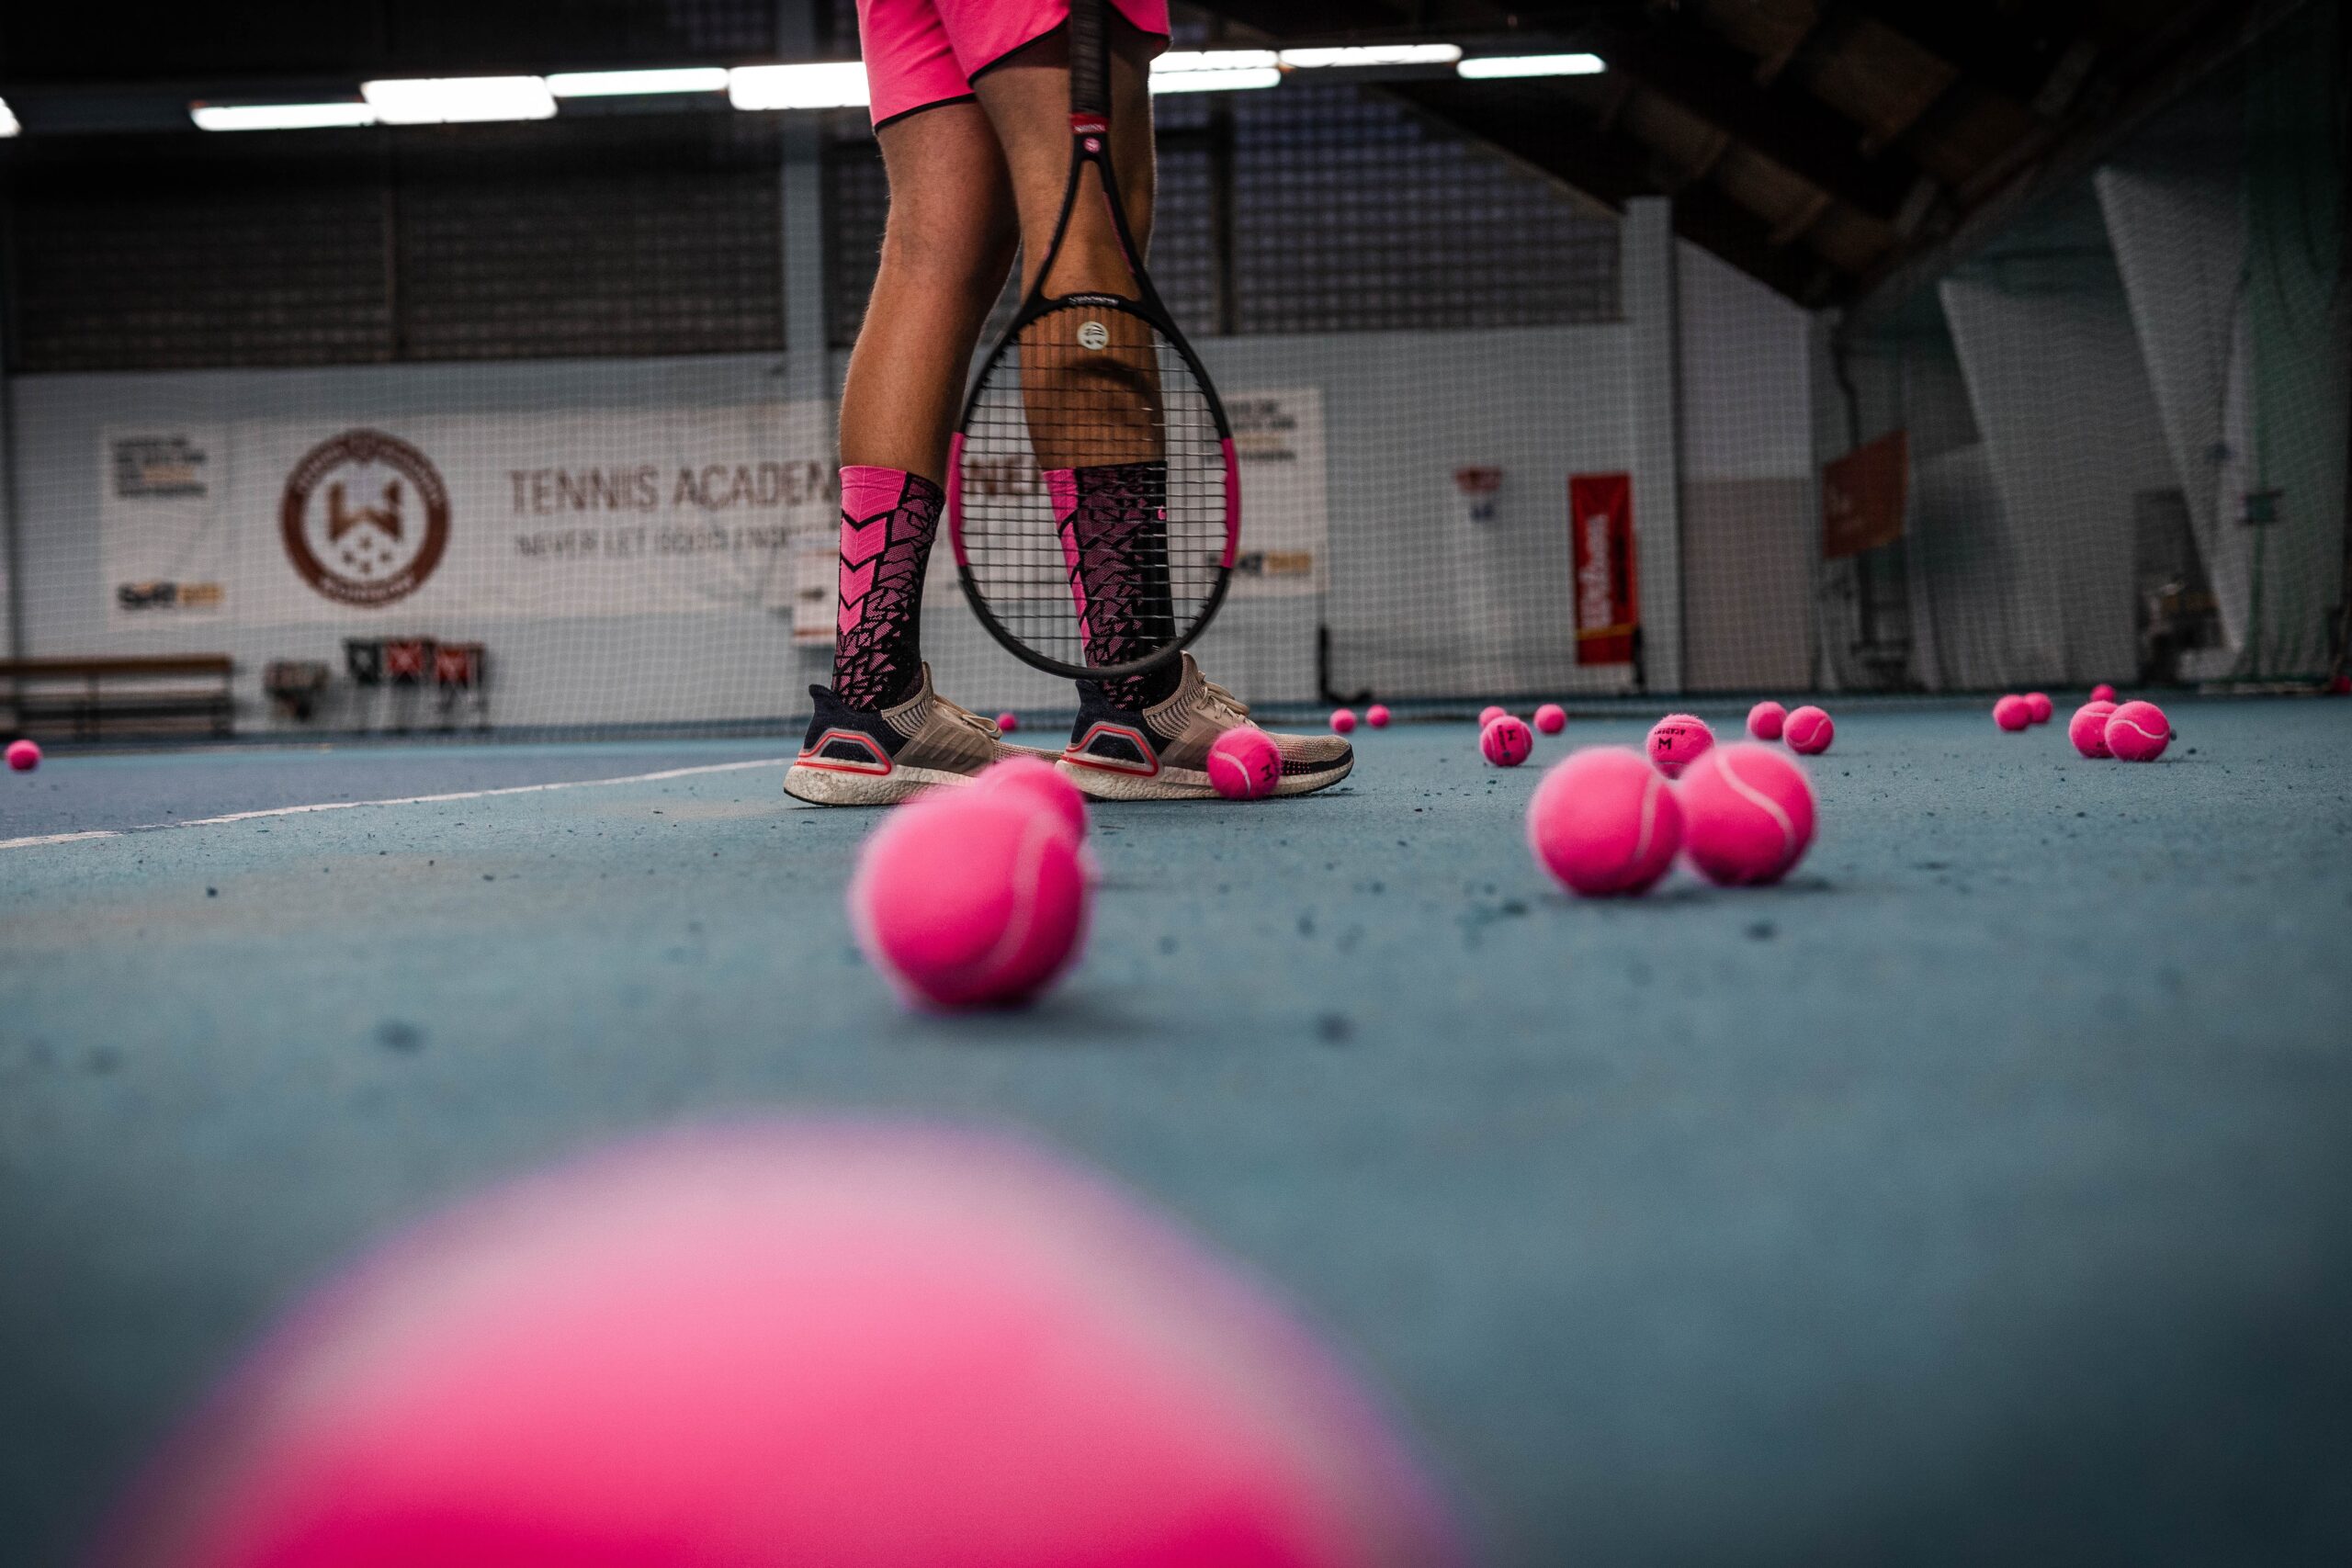 Tennis player with pink uniform, pink tennis balls lying around the court. Sign in the background reads "Tennis Academy"